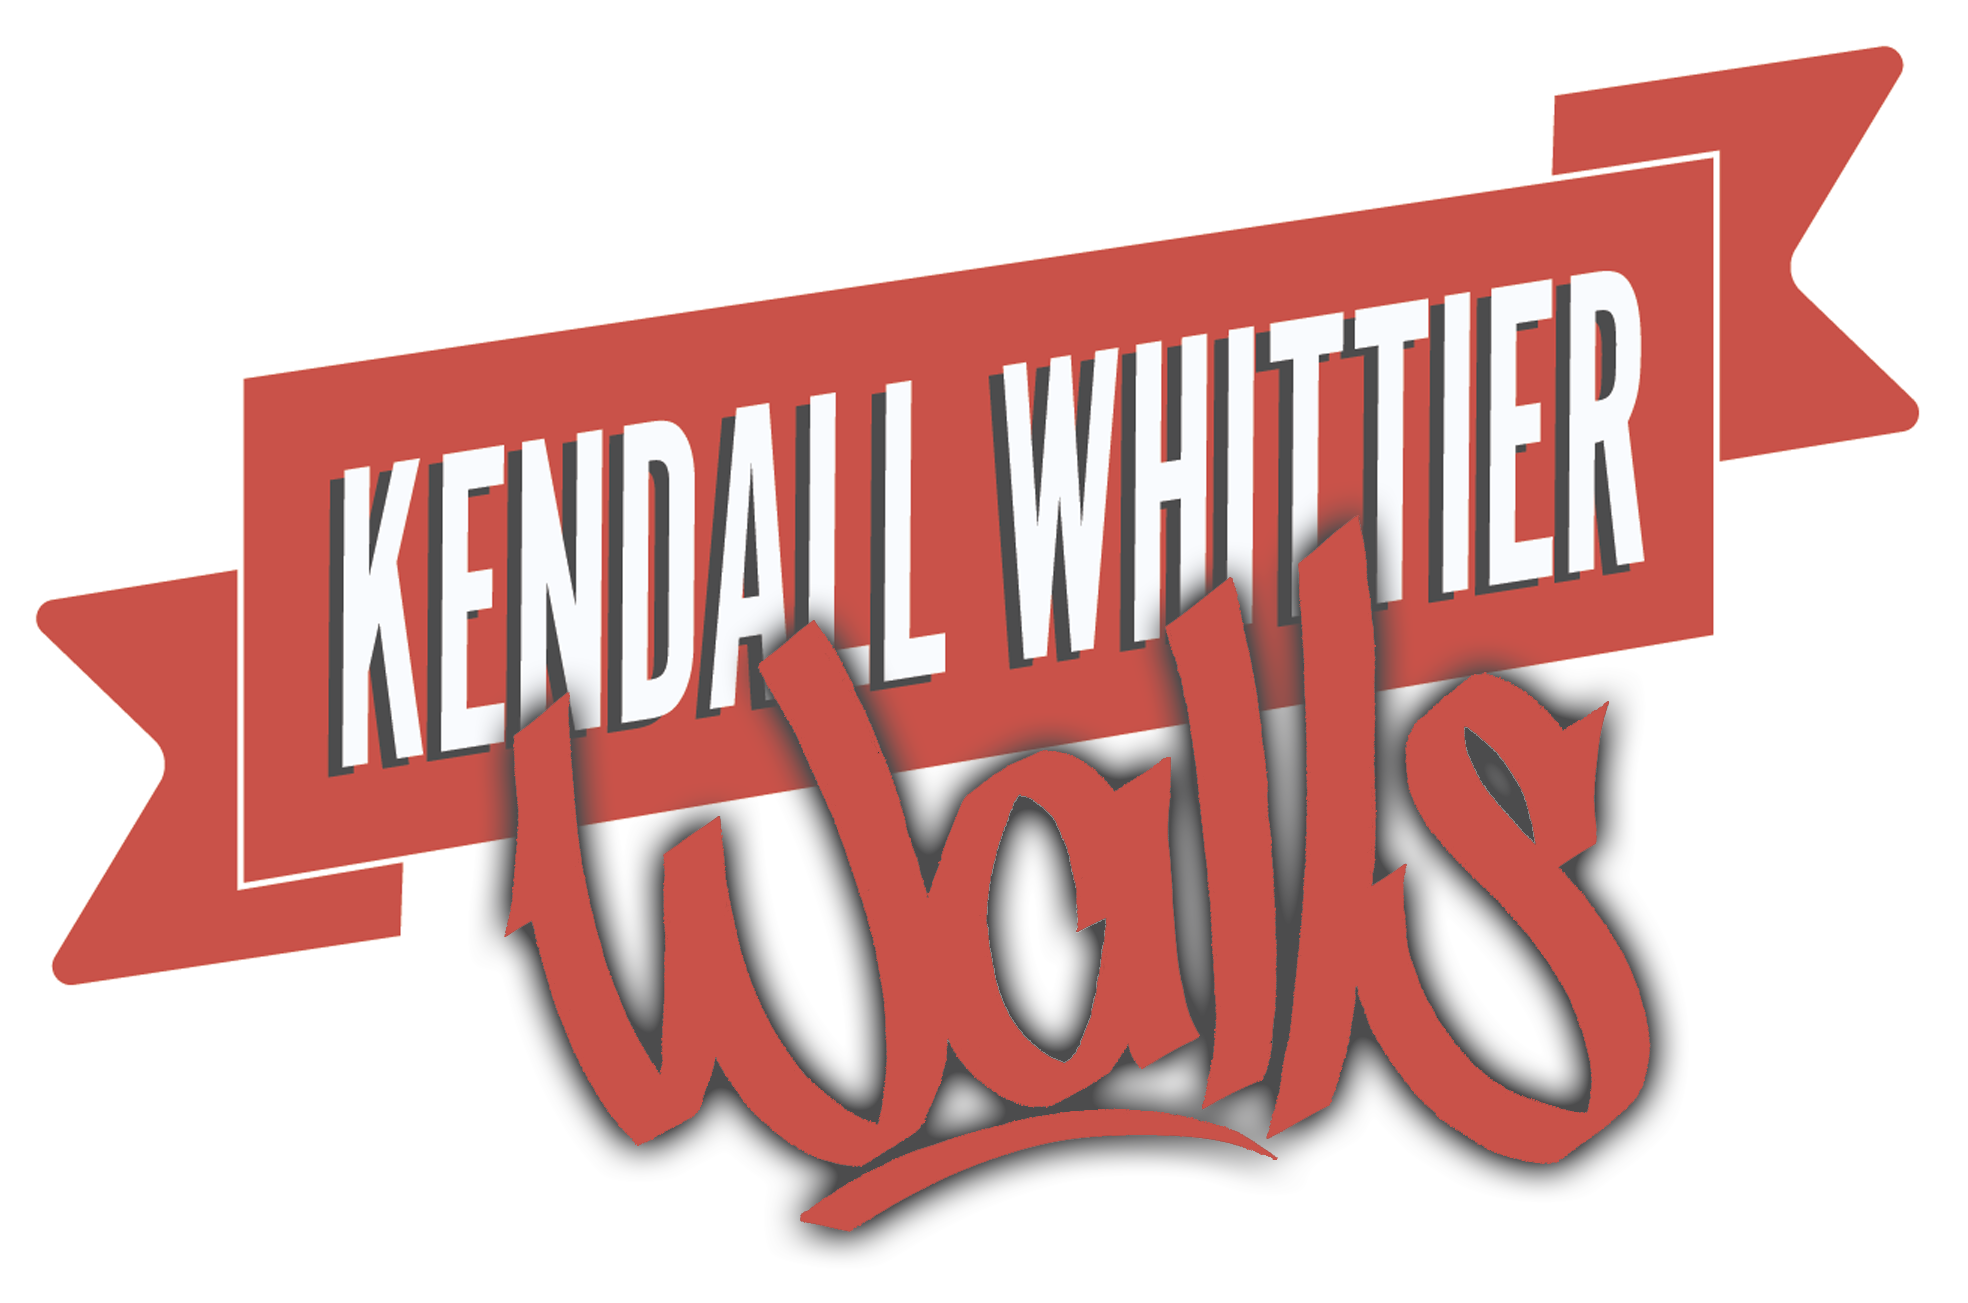 Locations selected for Kendall Whittier Walls